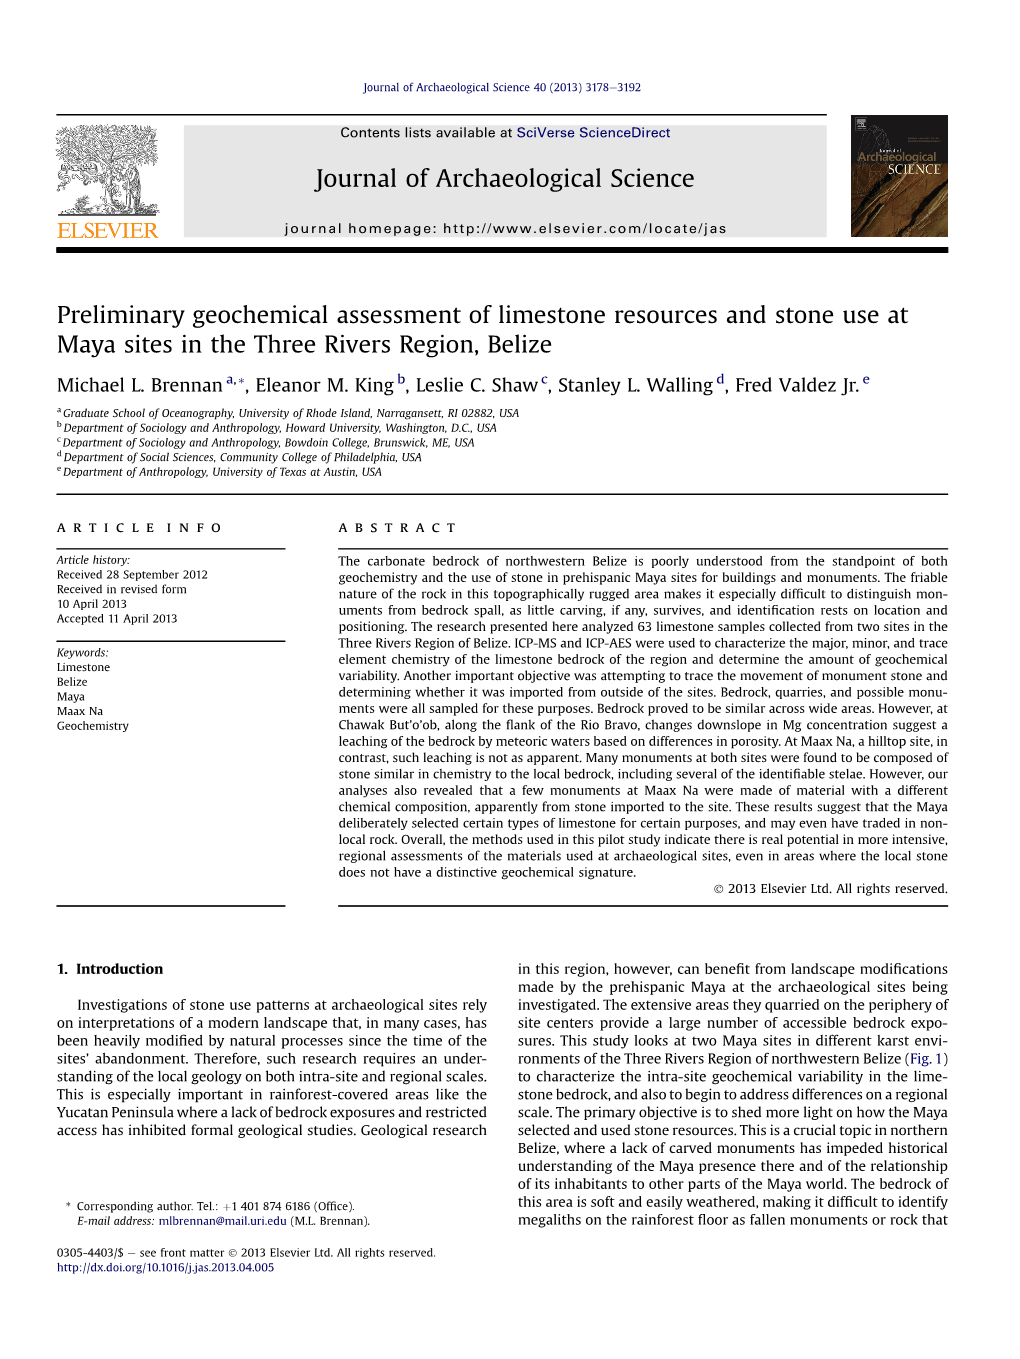 Preliminary Geochemical Assessment of Limestone Resources and Stone Use at Maya Sites in the Three Rivers Region, Belize